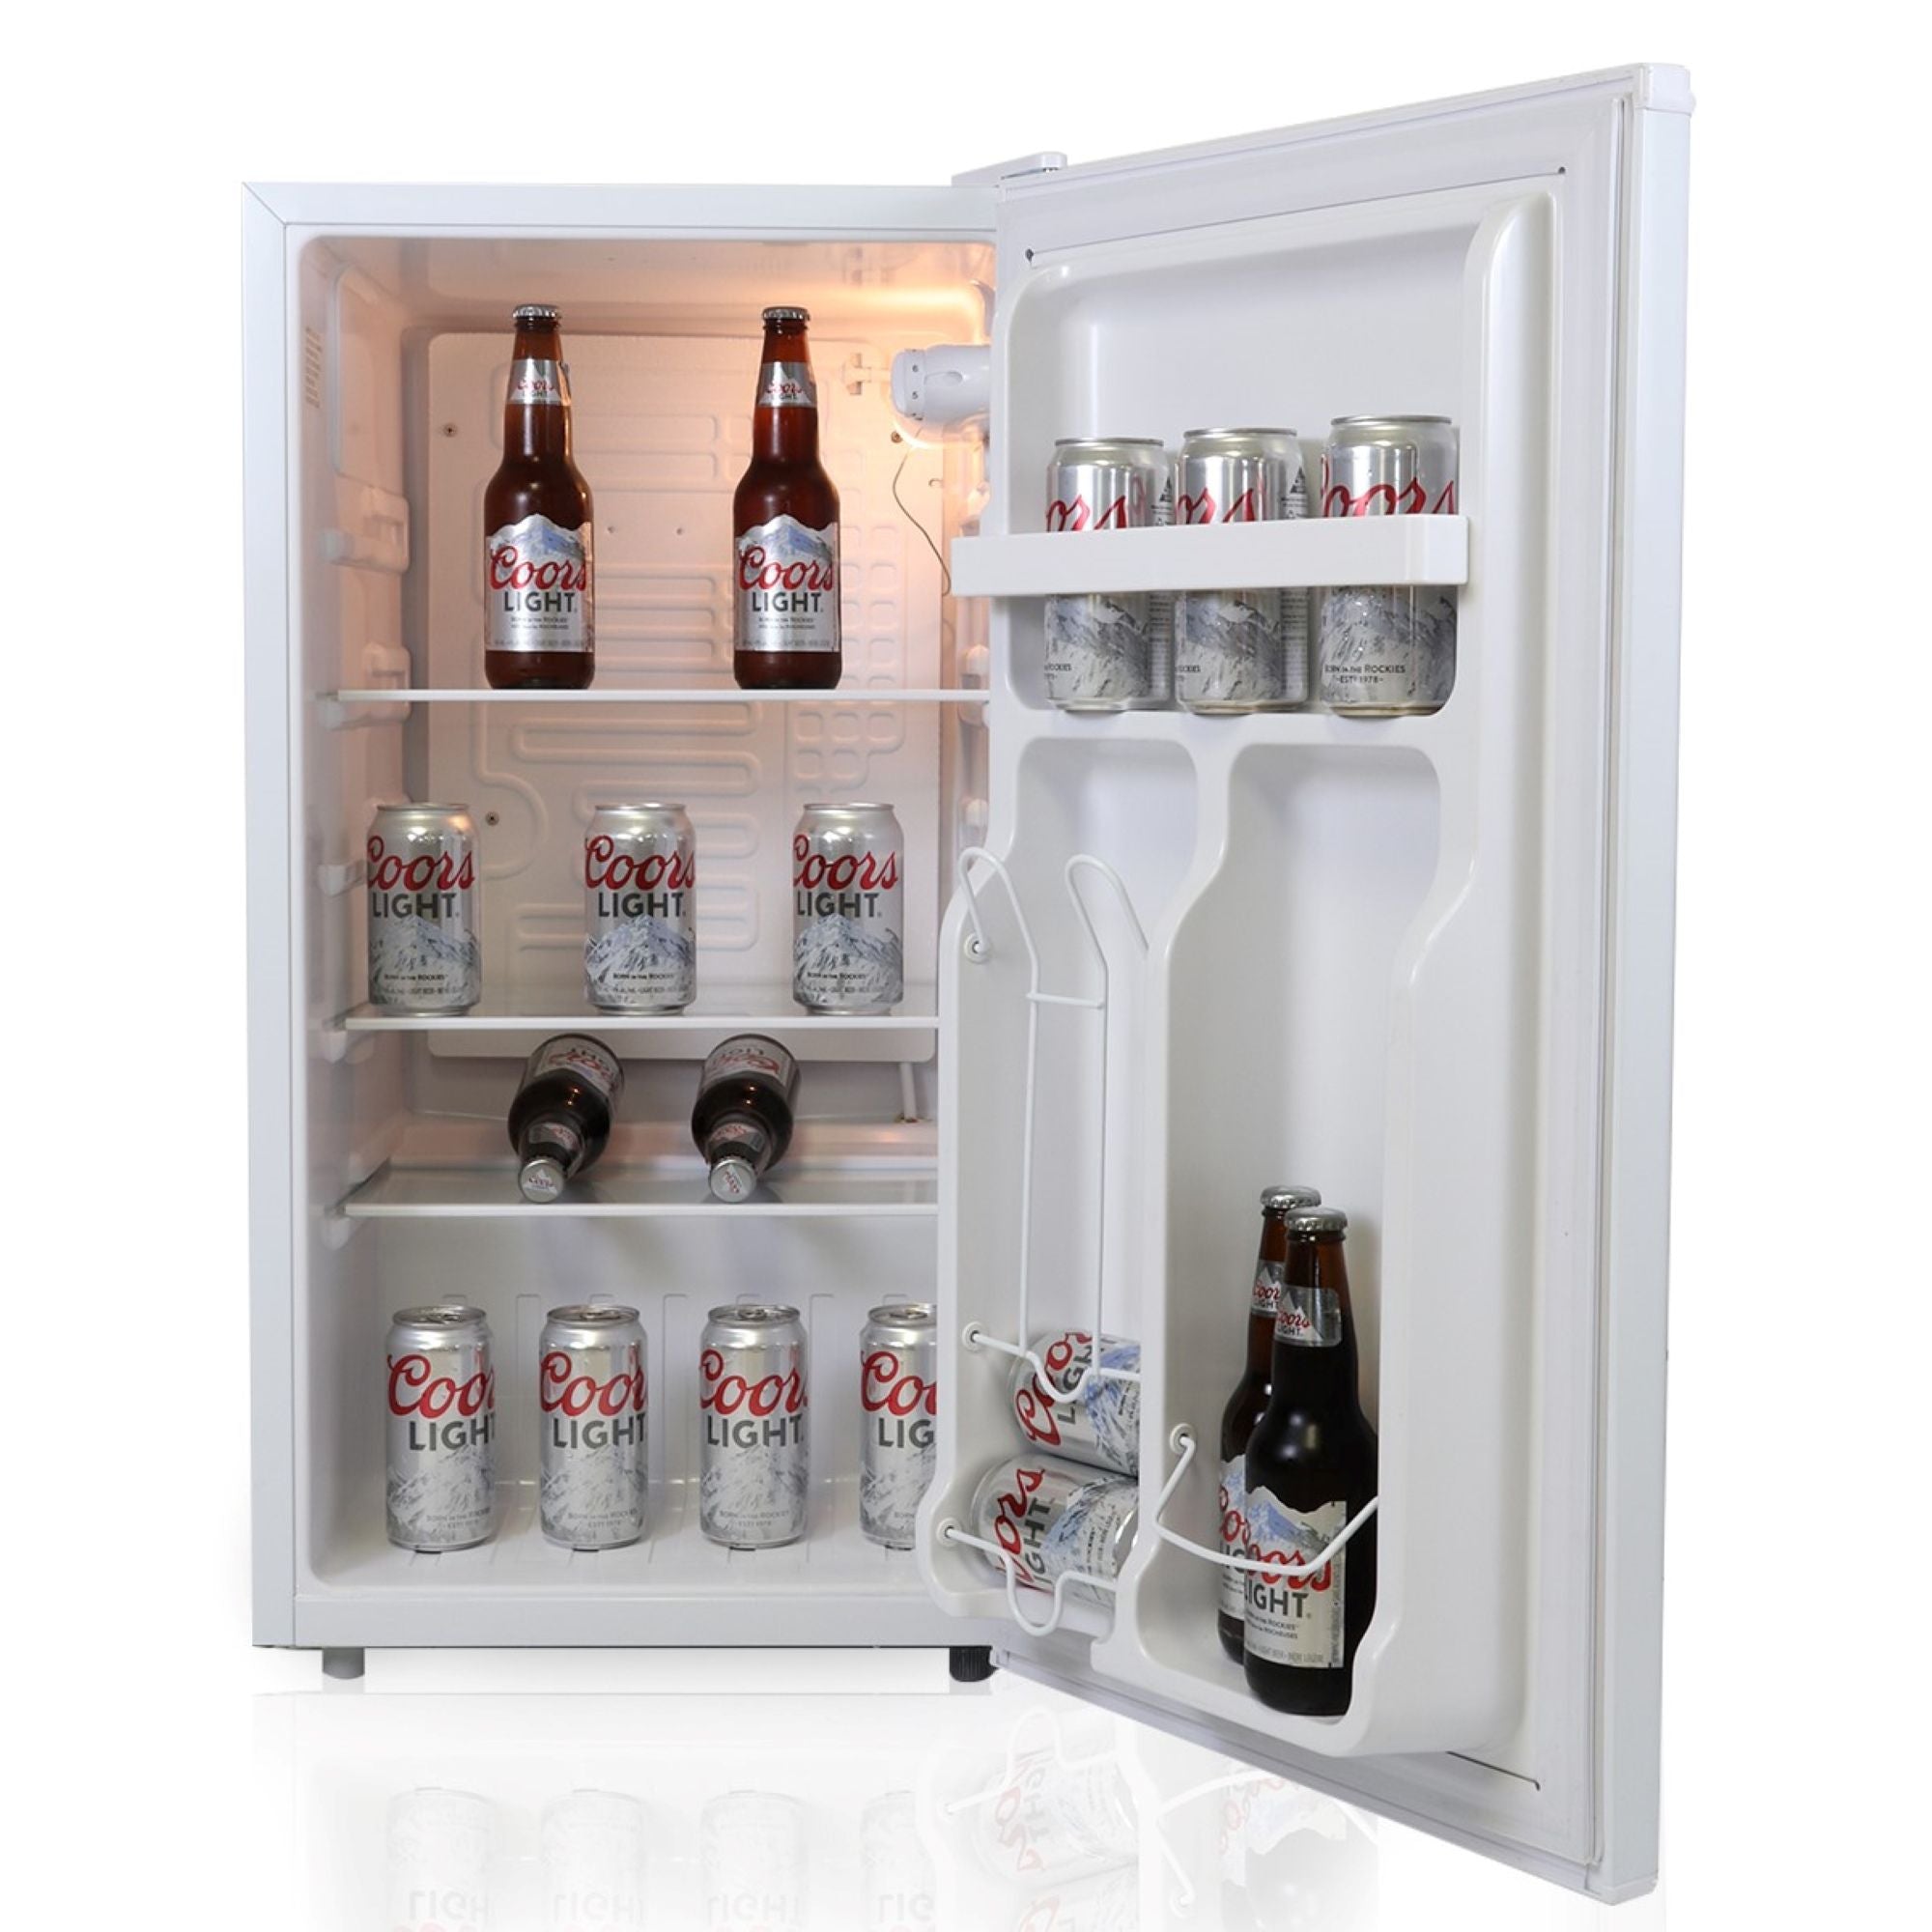 Product shot of Coors Light compact fridge with bottle opener, open and filled with bottles and cans of Coors Light beer, on a white background